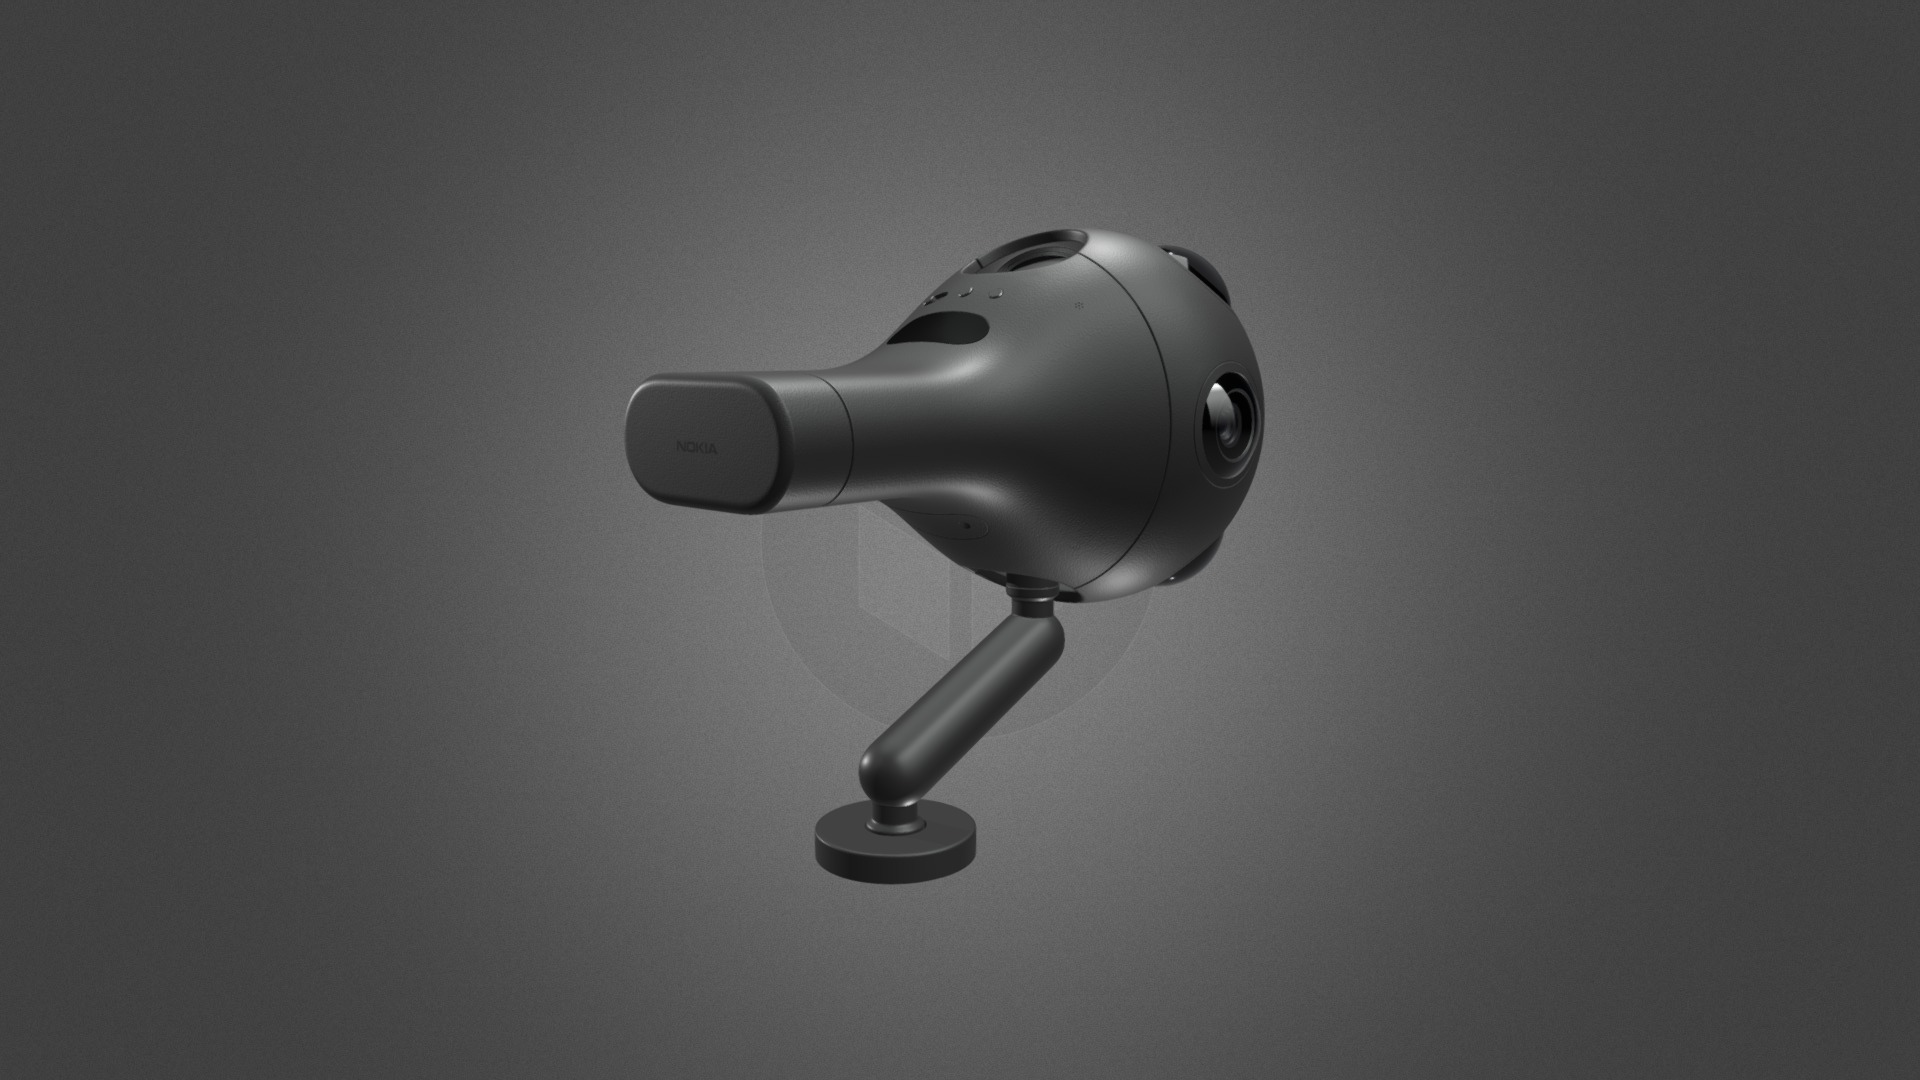 3D model Nokia OZO for Element 3D - This is a 3D model of the Nokia OZO for Element 3D. The 3D model is about a light bulb with a black background.